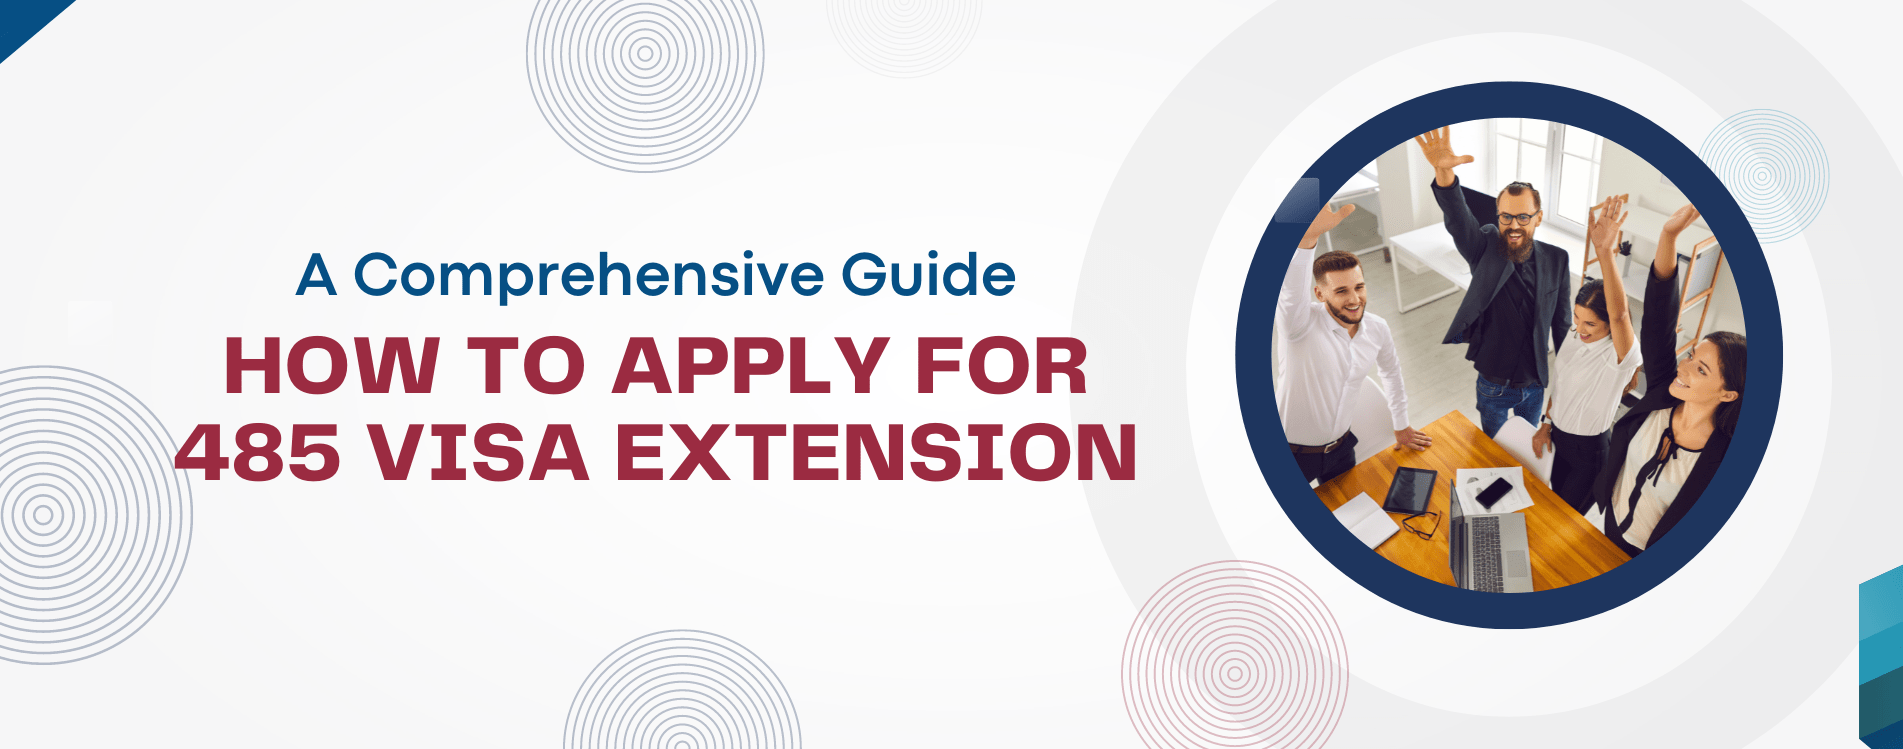 How to Apply for a 485 Visa Extension: A Comprehensive Guide